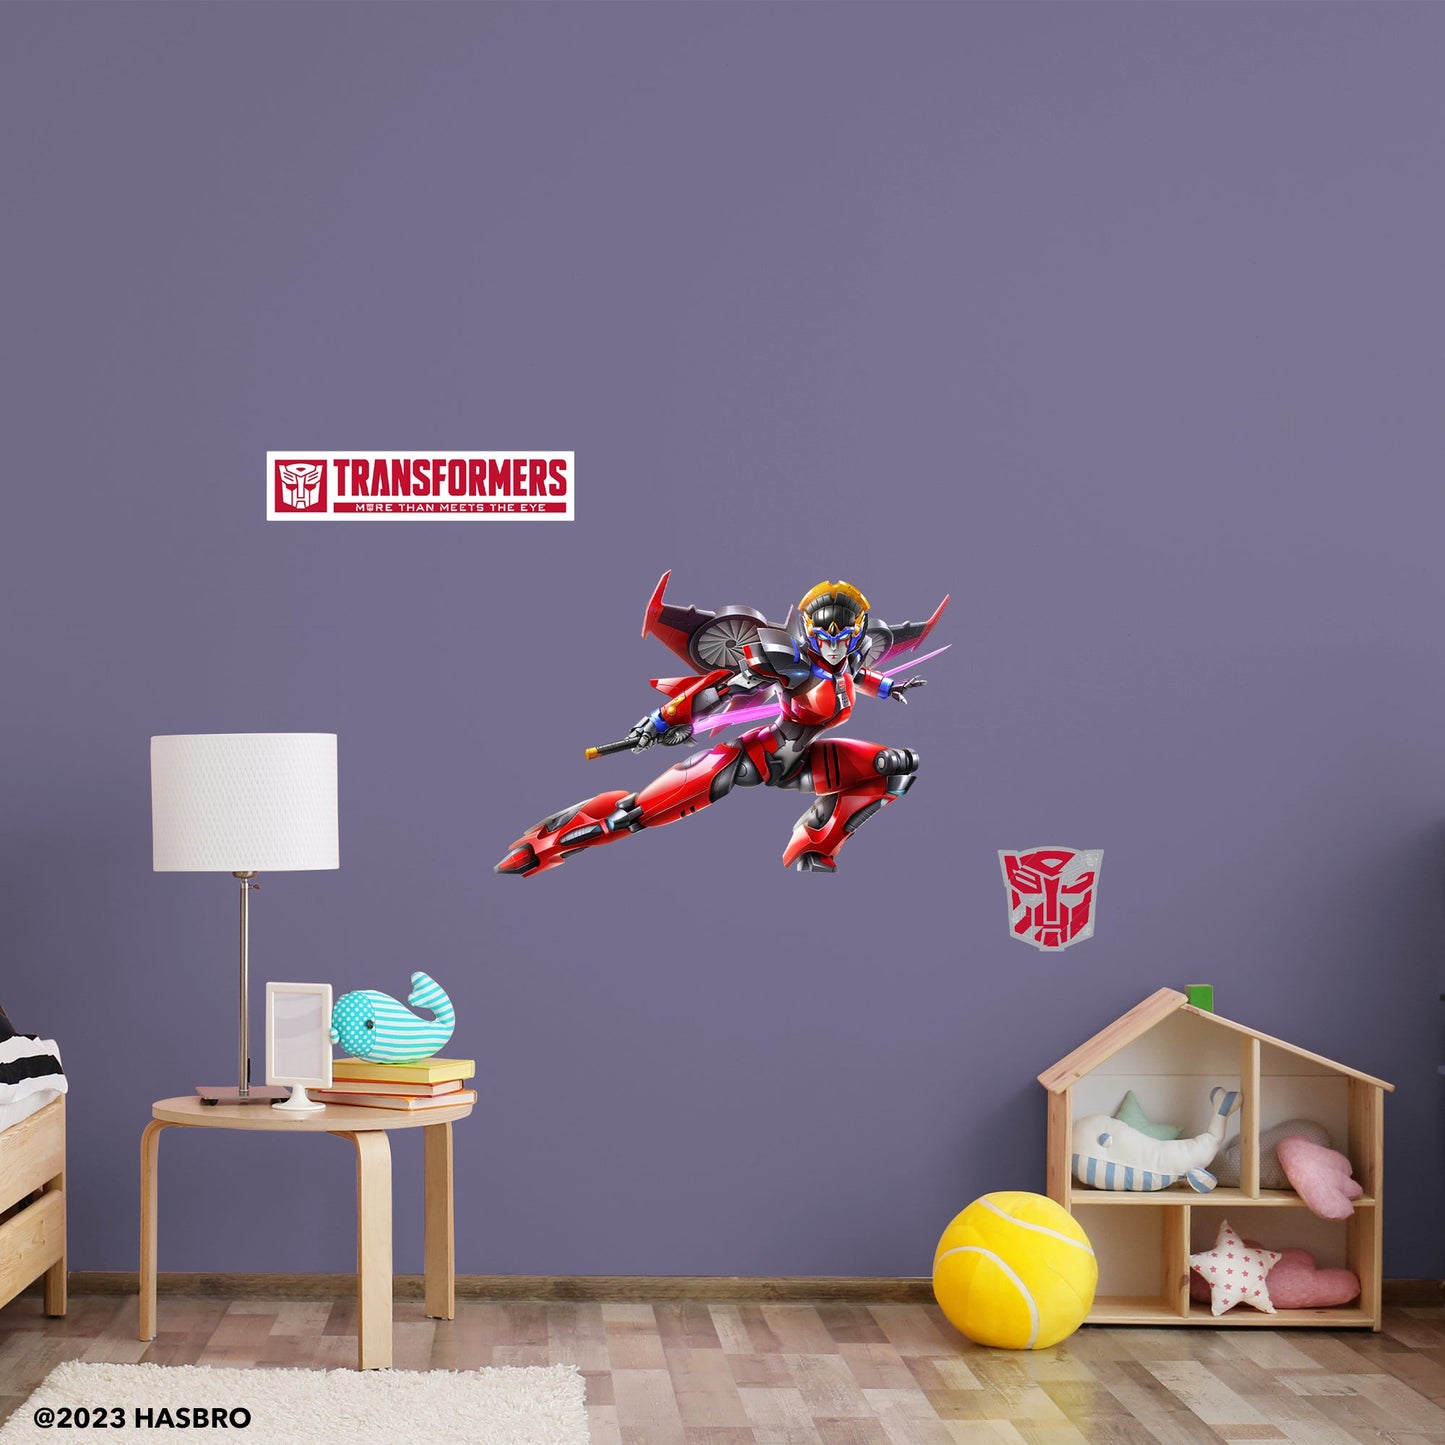 Transformers: Windblade RealBig - Officially Licensed Hasbro Removable Adhesive Decal